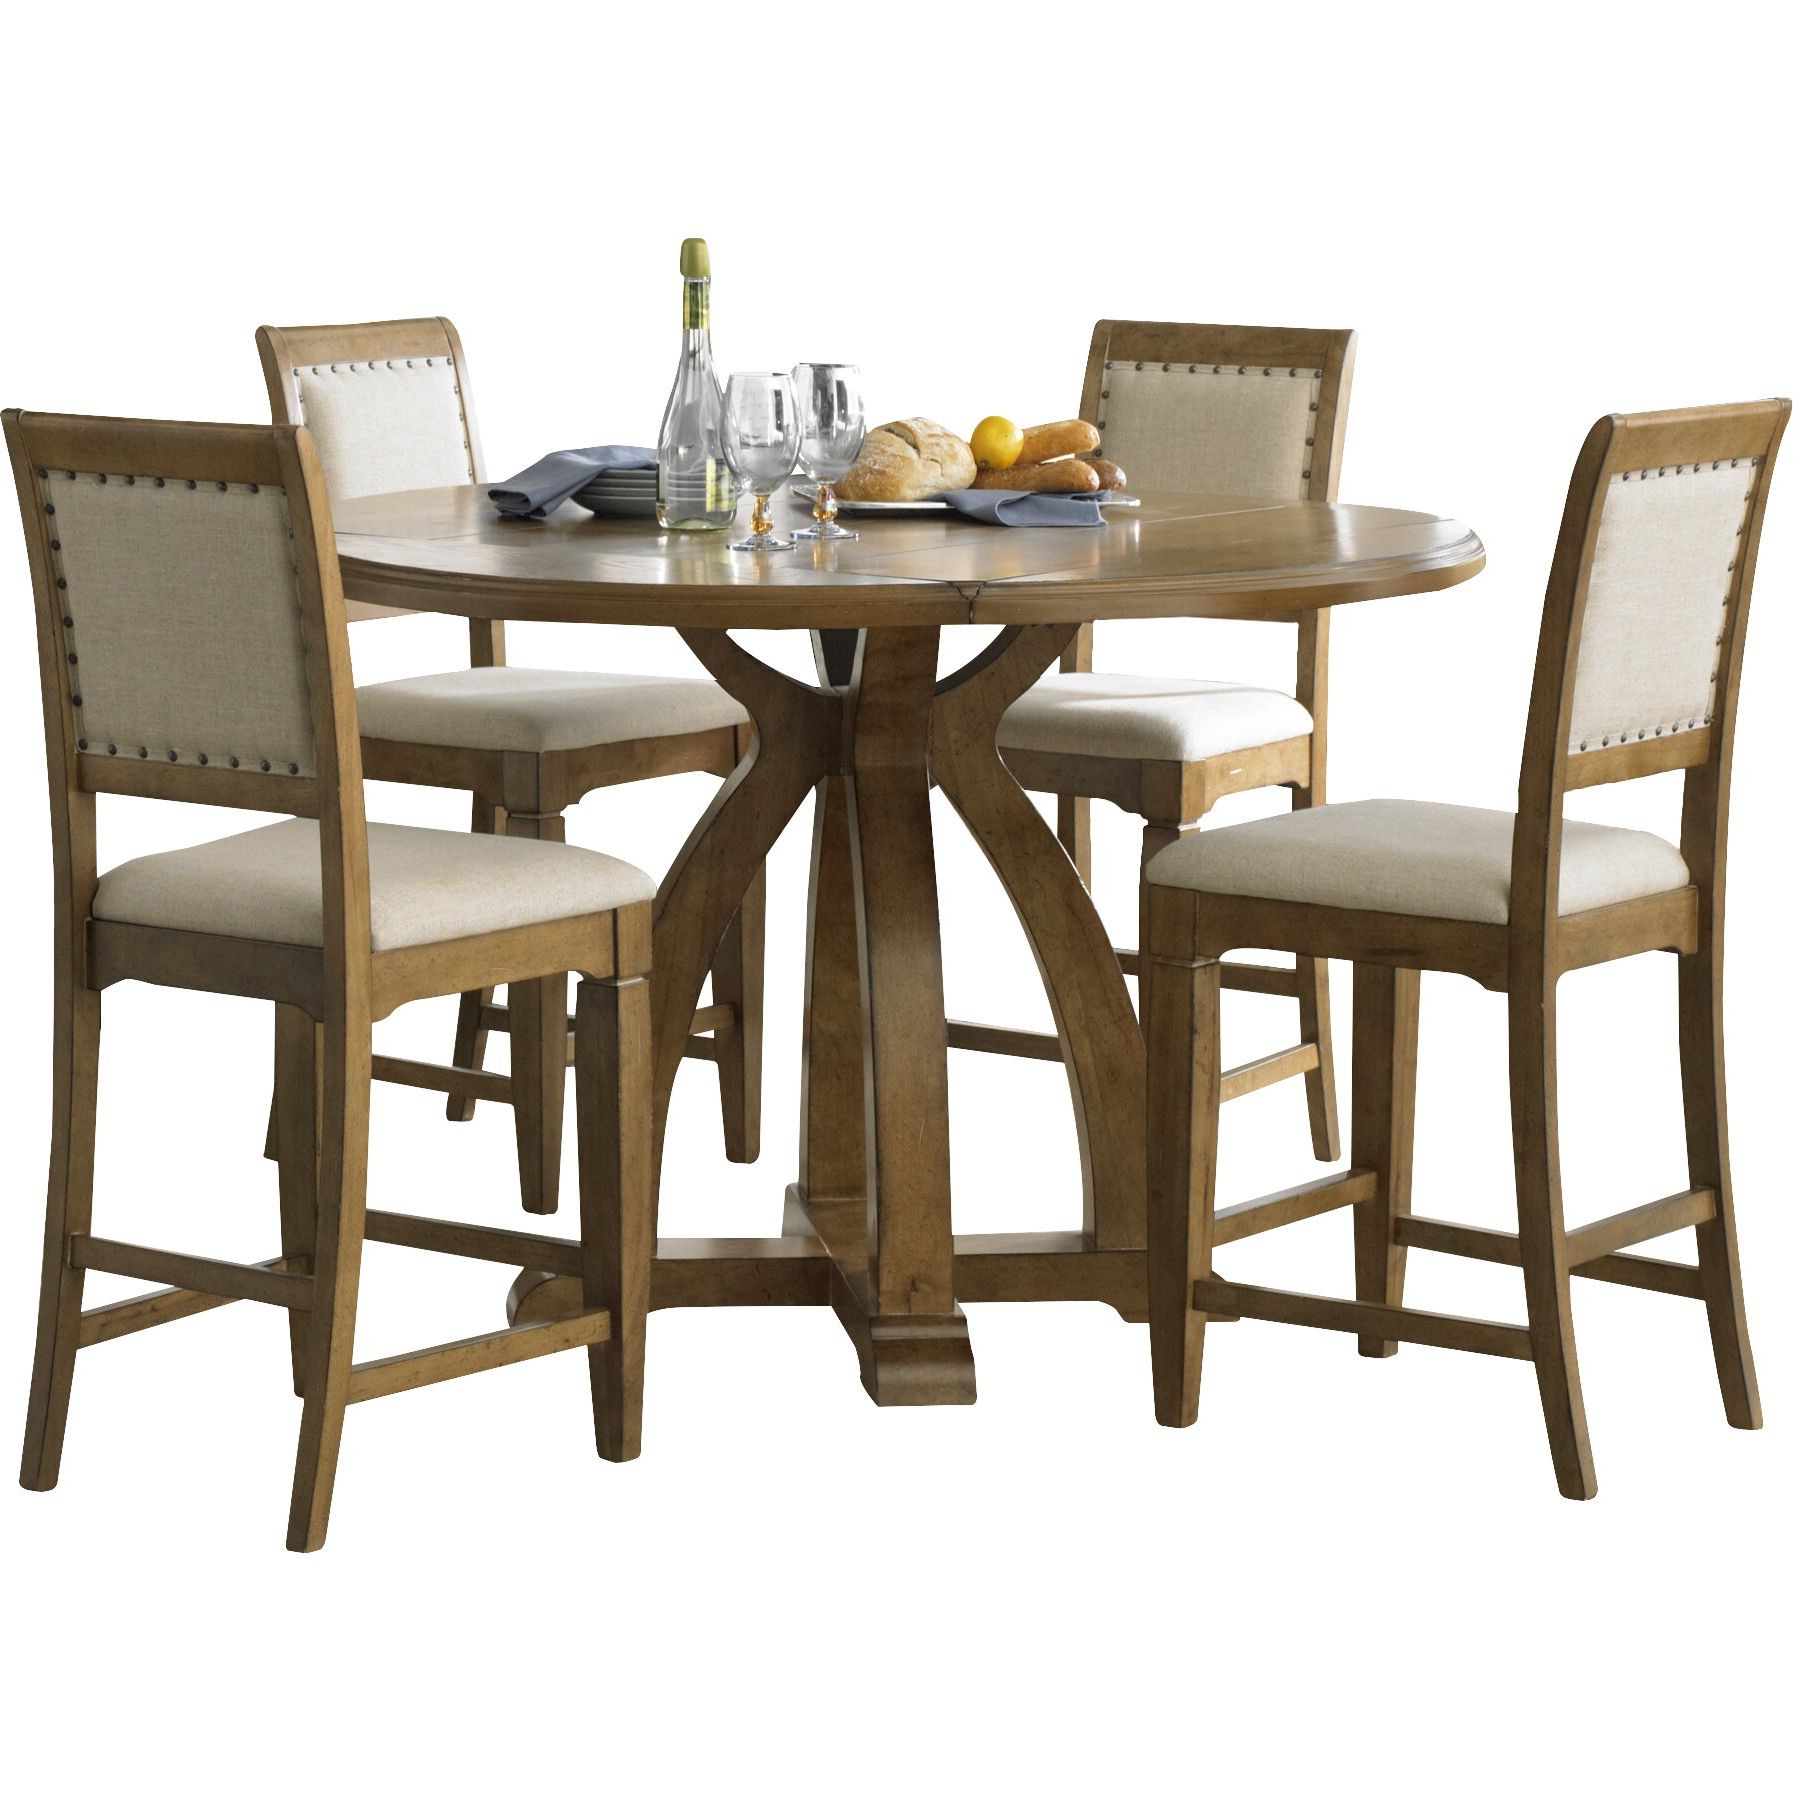 Wayfair With Well Known Counter Height Pedestal Dining Tables (Gallery 8 of 20)